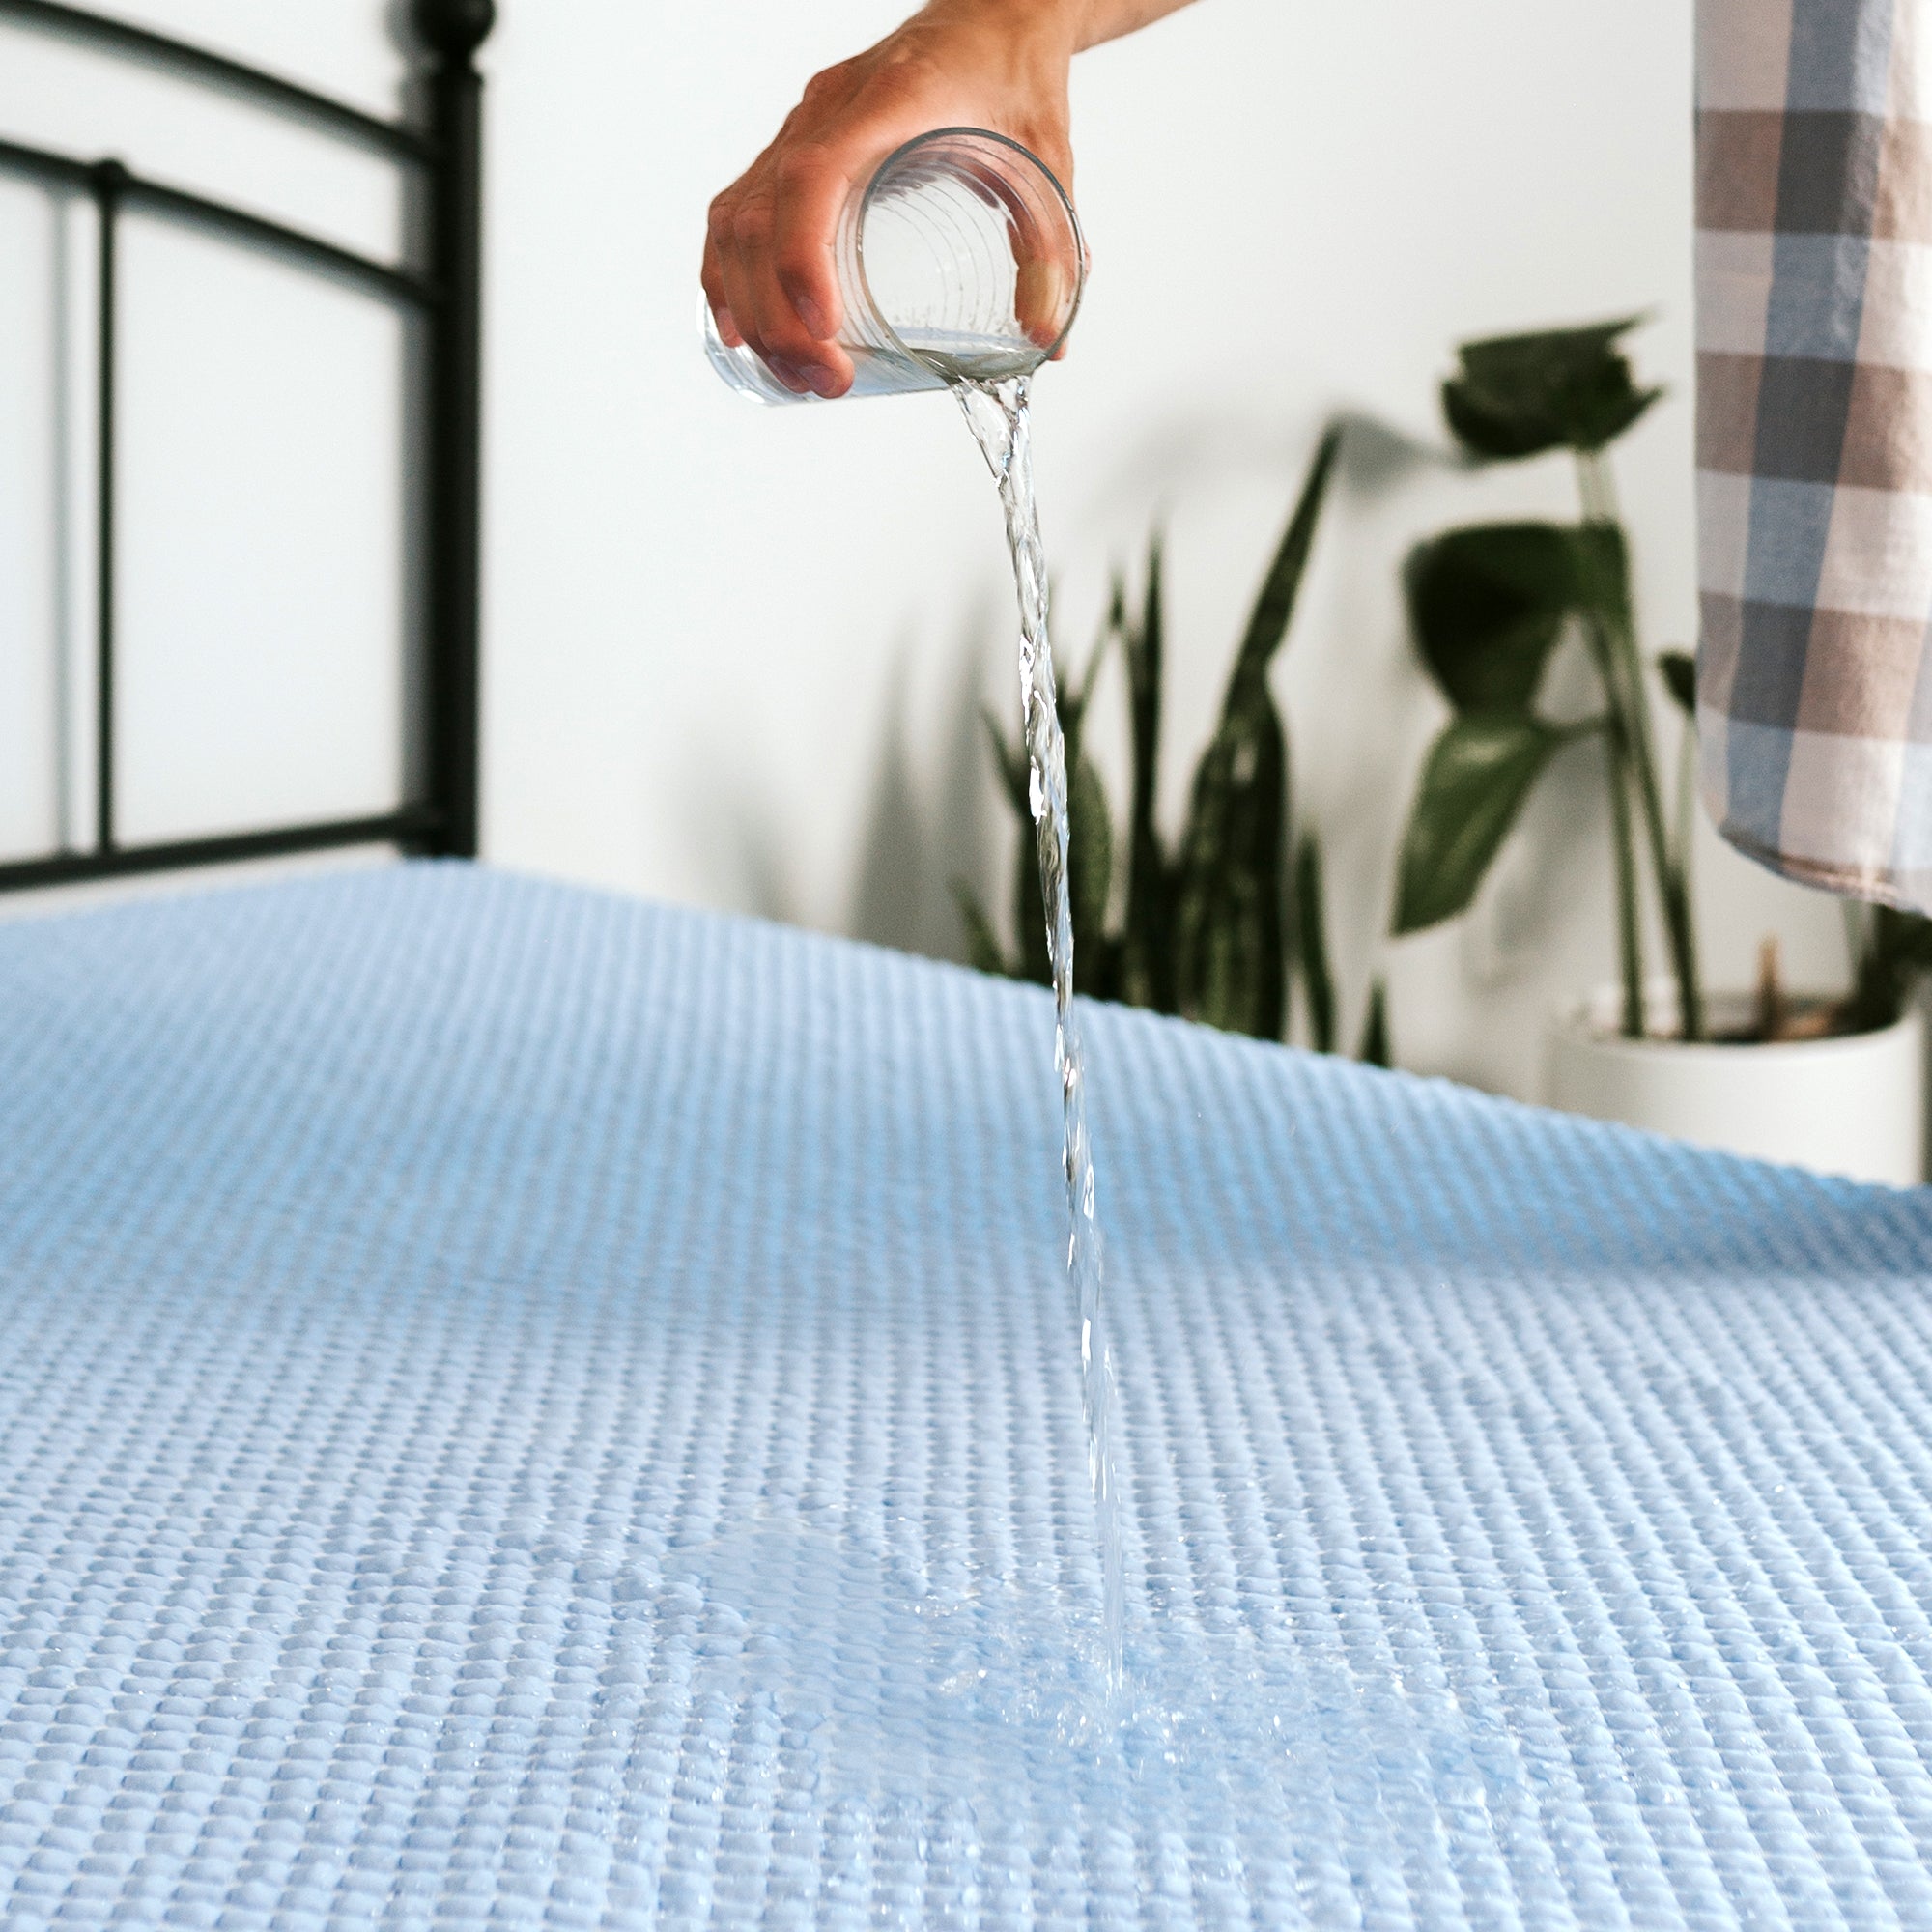 Cooling Mattress Topper for Bed